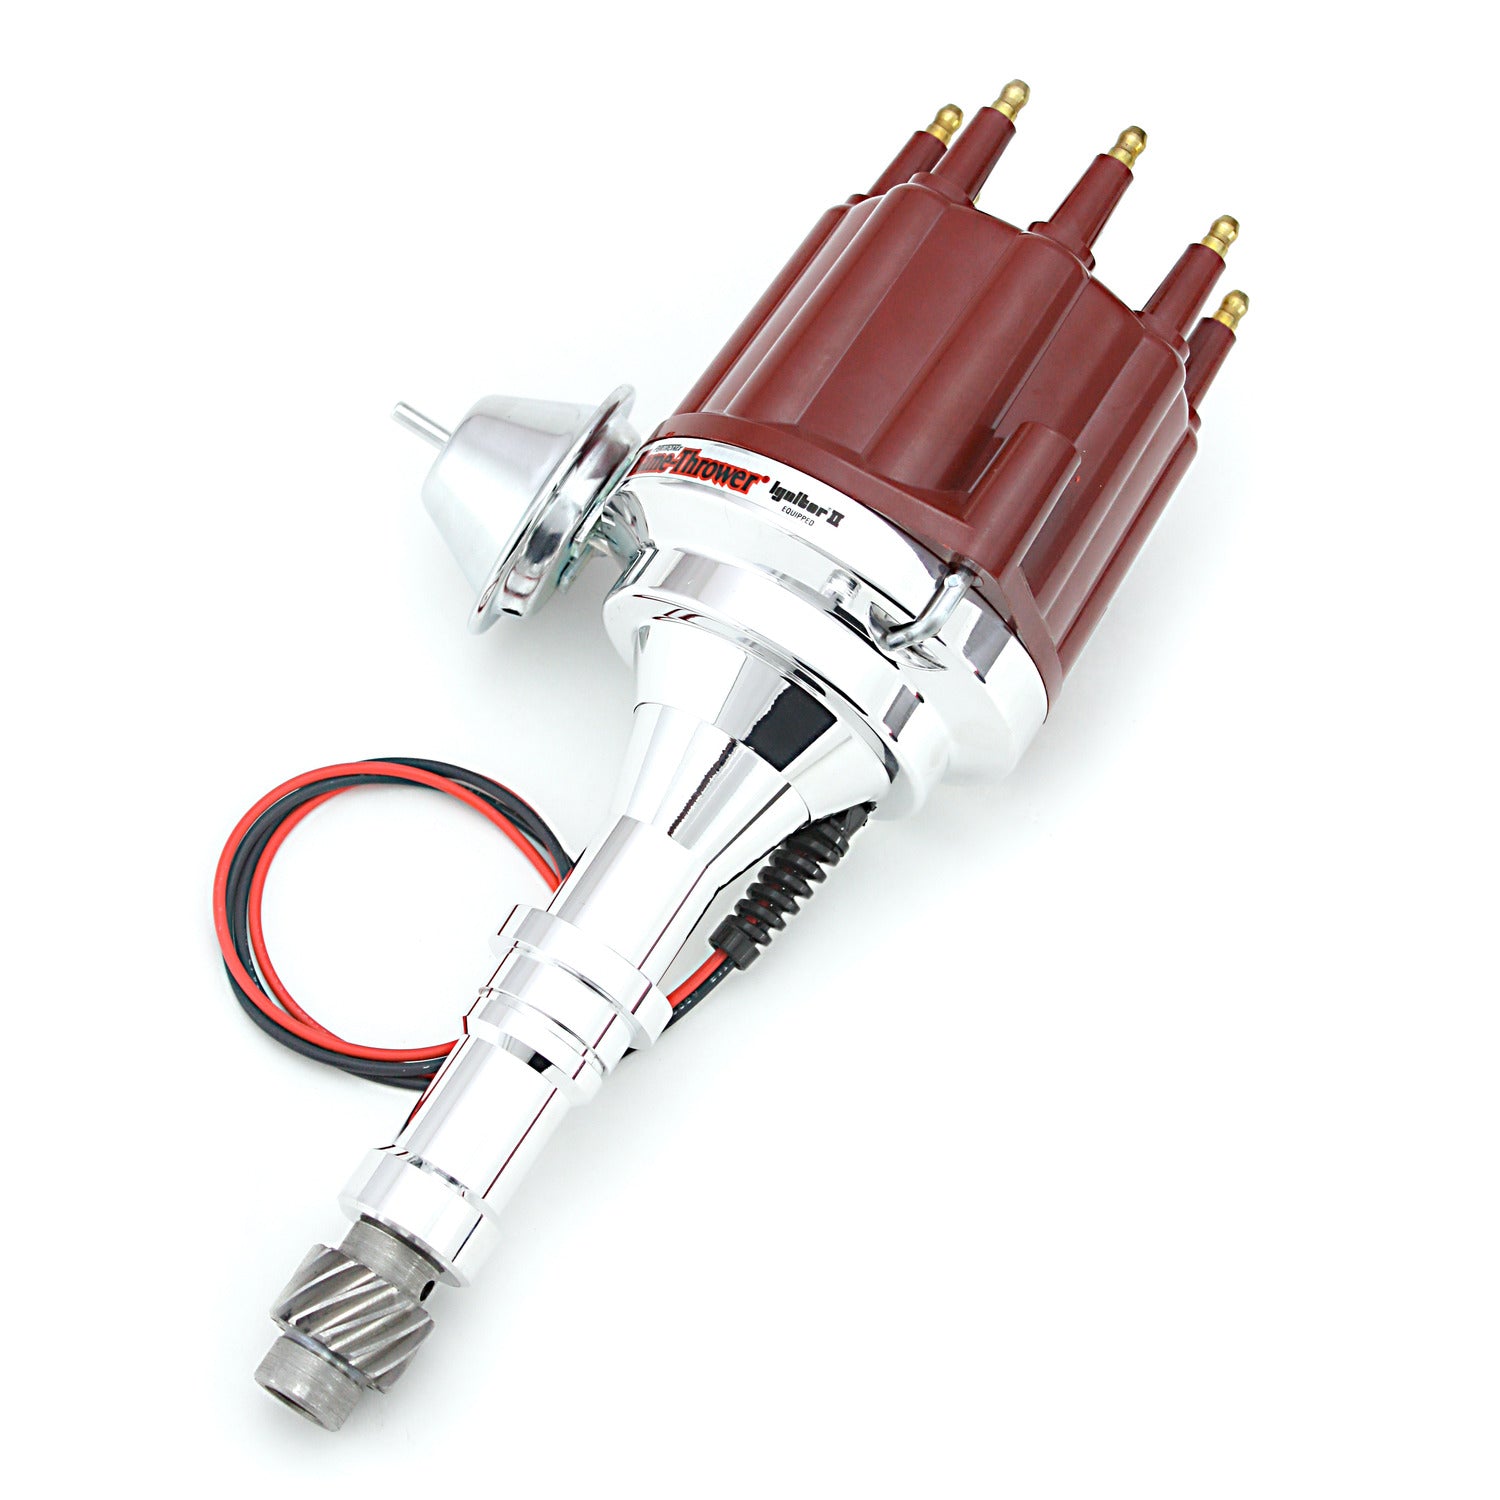 PerTronix D151711 Flame-Thrower Electronic Distributor Billet Buick V8 215-350 Plug and Play with Ignitor II Technology Vacuum Advance Red Male Cap